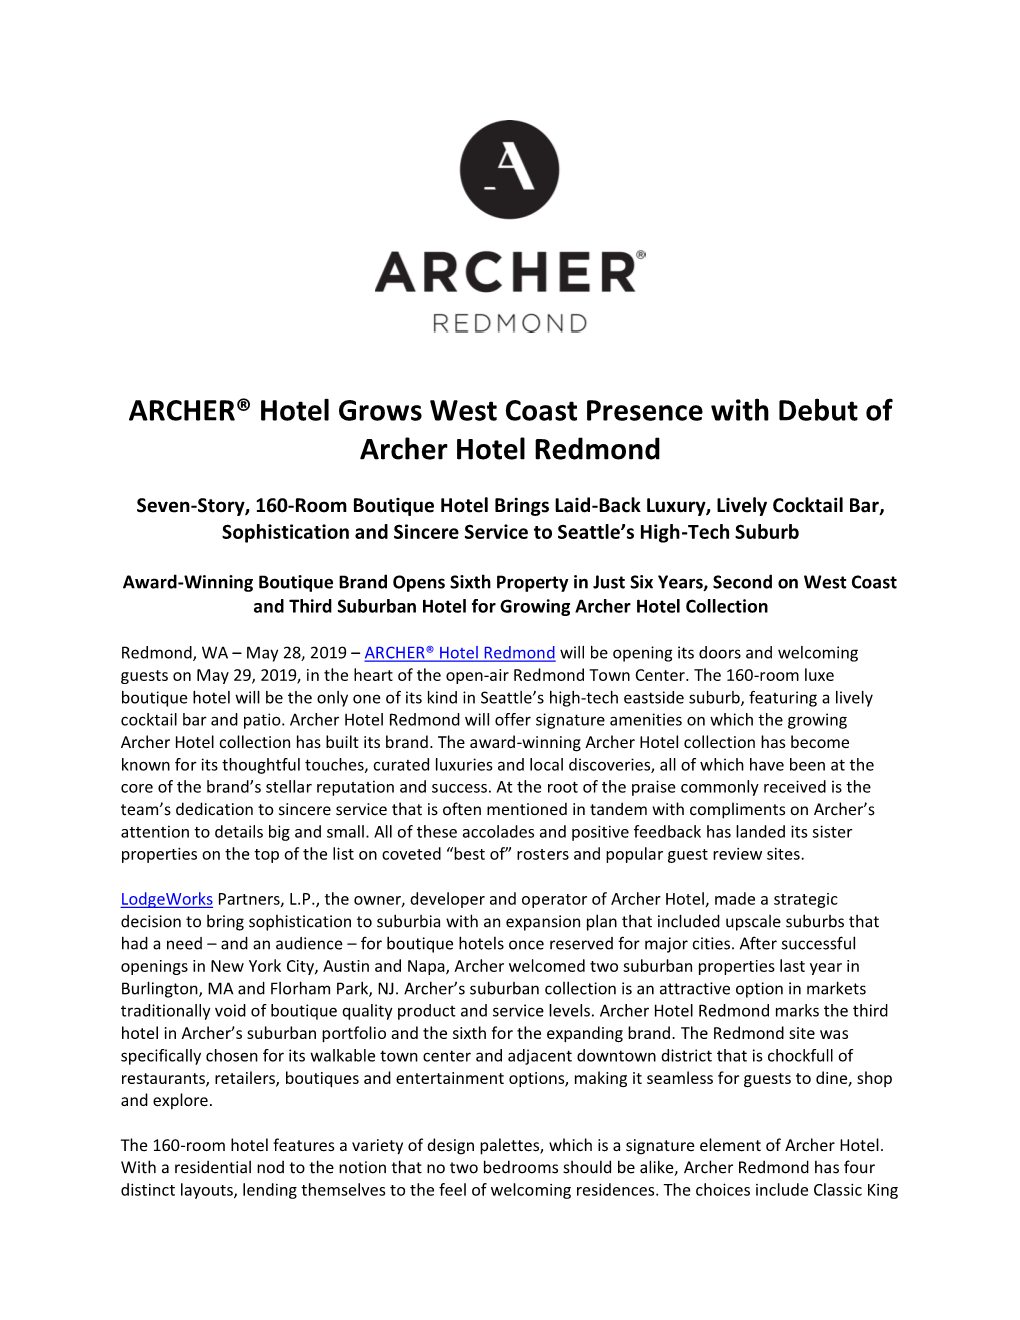 ARCHER® Hotel Grows West Coast Presence with Debut of Archer Hotel Redmond